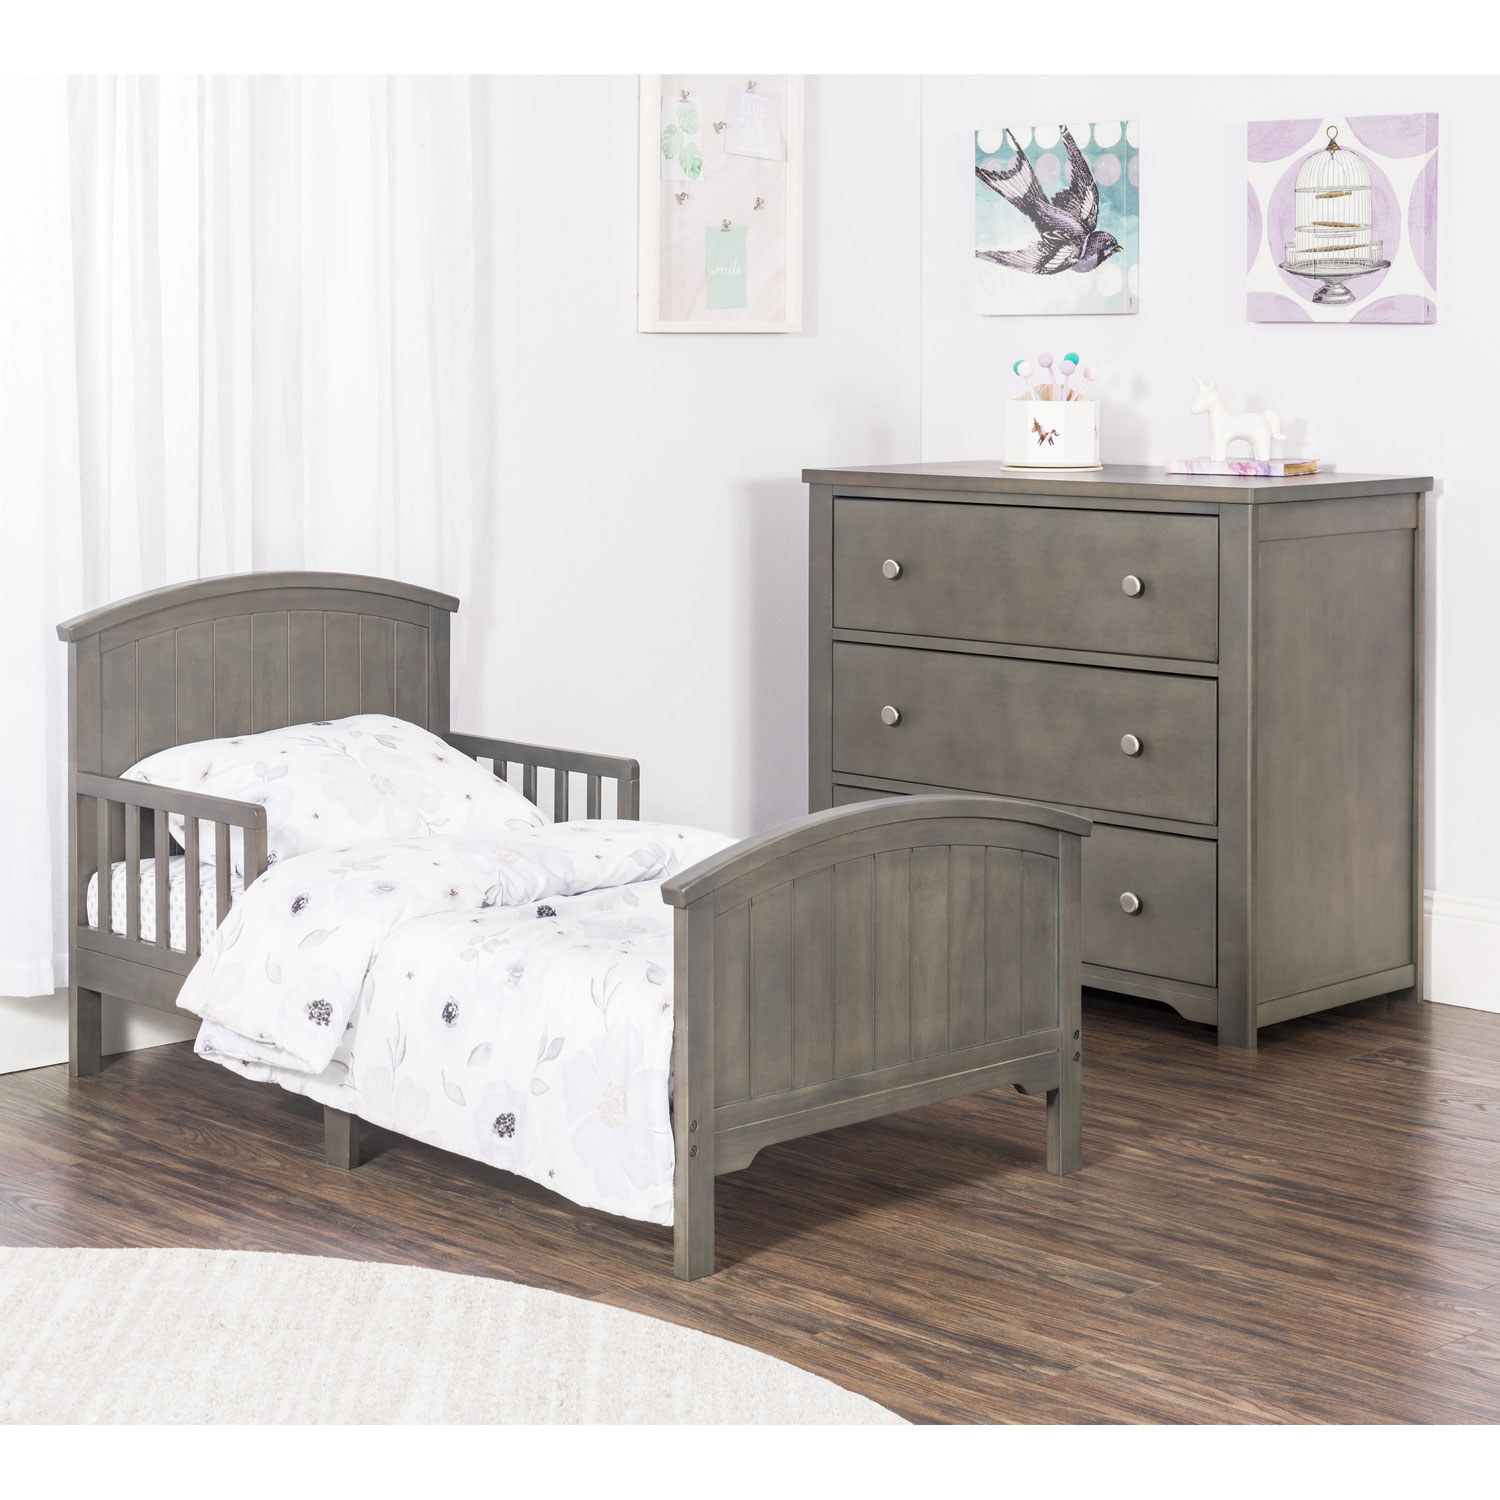 Forever Eclectic Hampton Traditional Kids Bed - Toddler - Dapper Grey